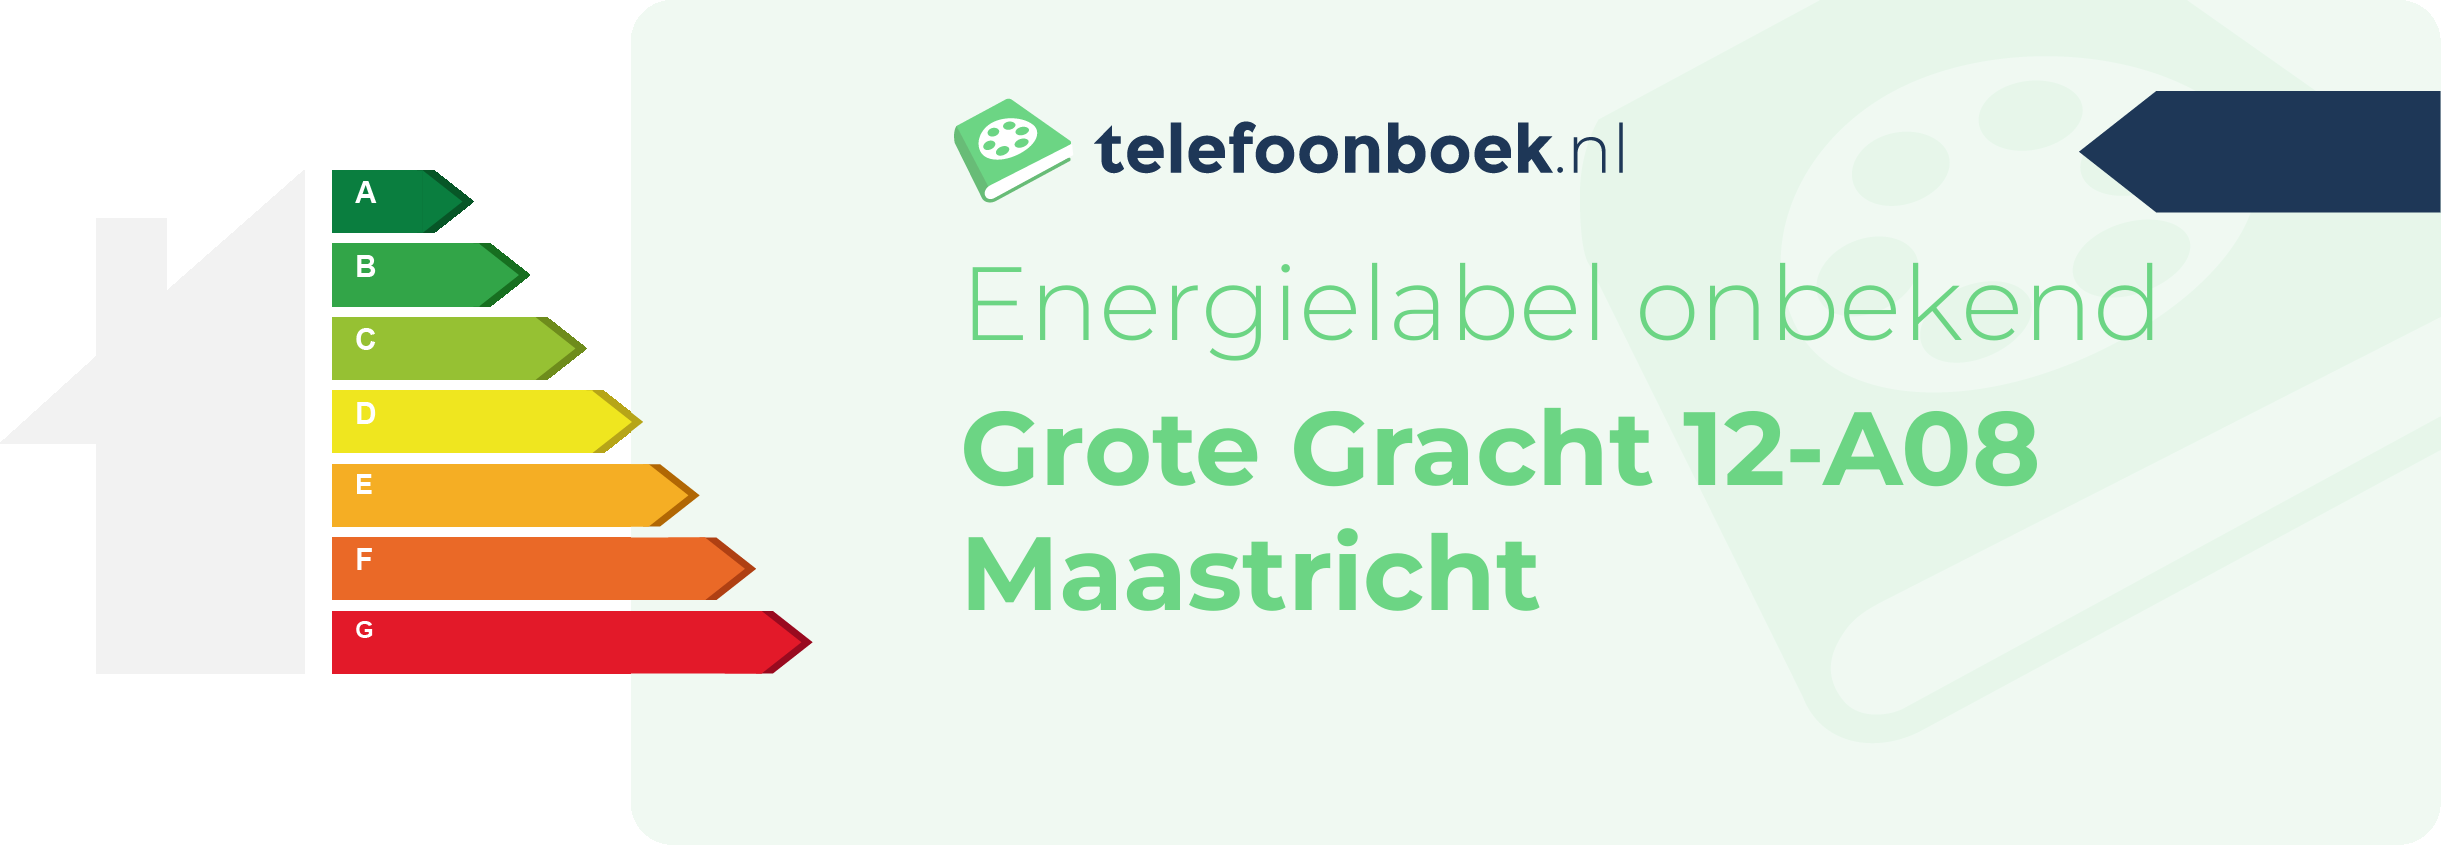 Energielabel Grote Gracht 12-A08 Maastricht